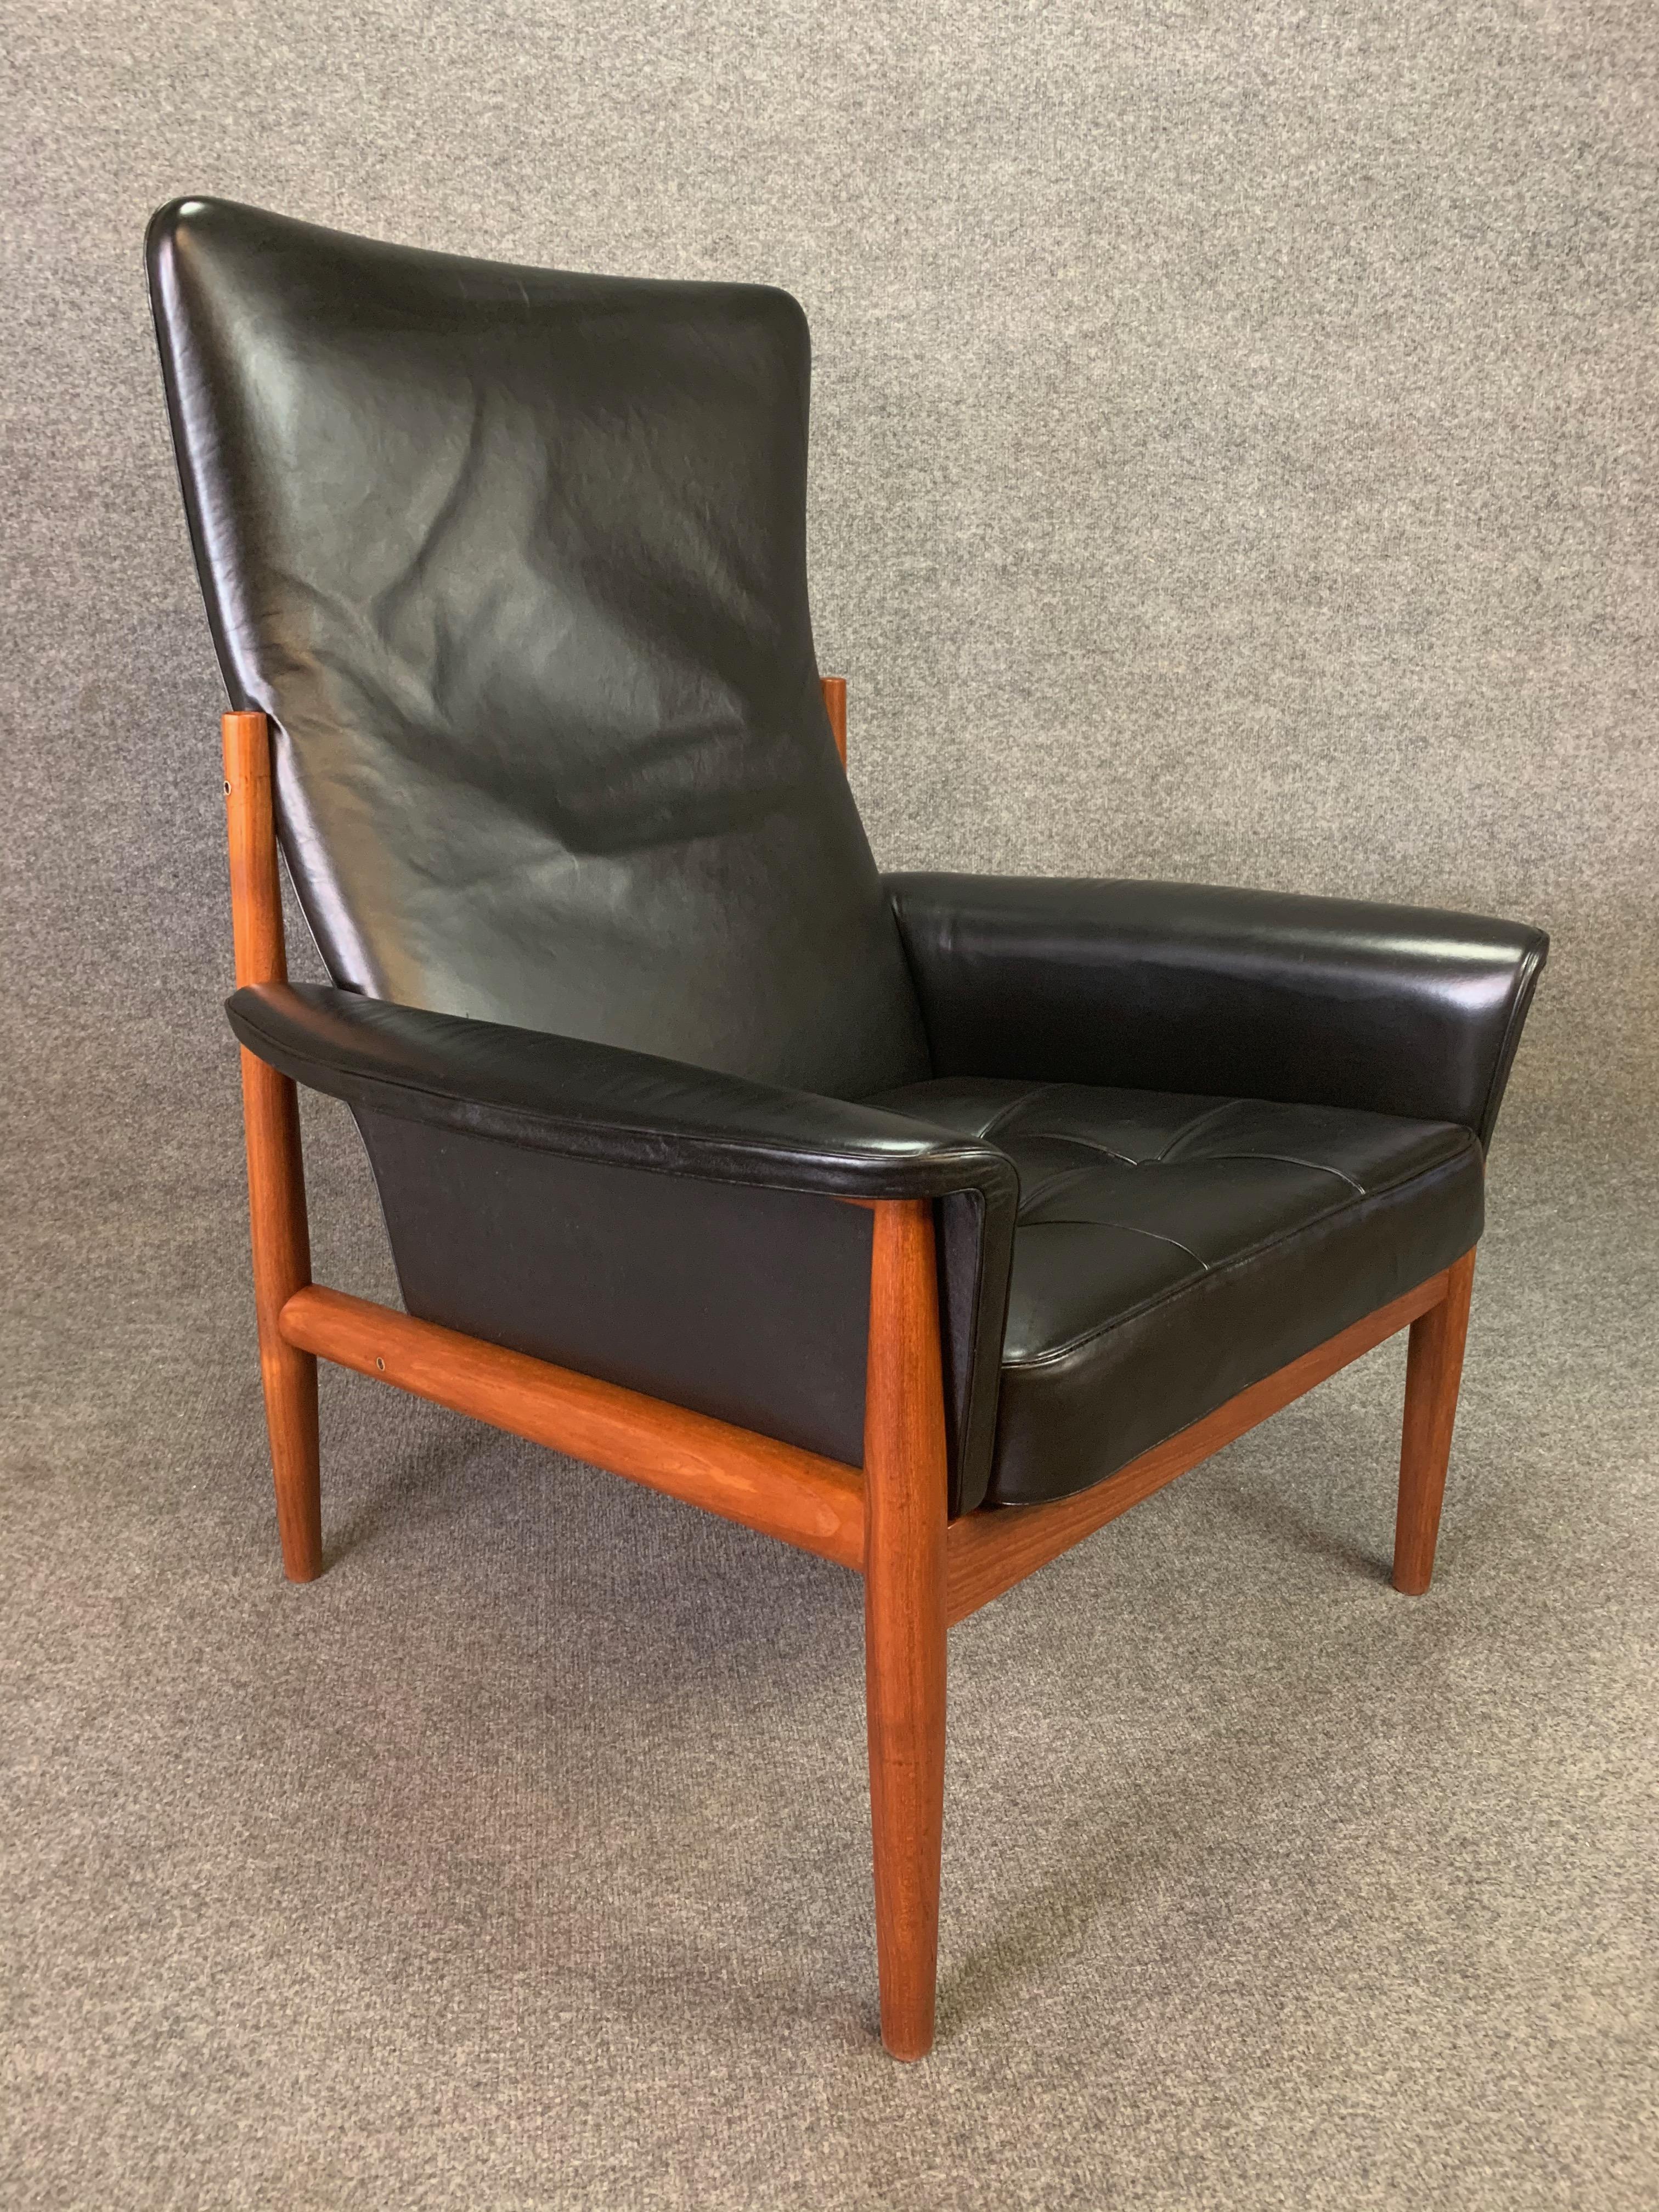 Here is an exclusive 1950s Scandinavian Modern high back easy chair, model 